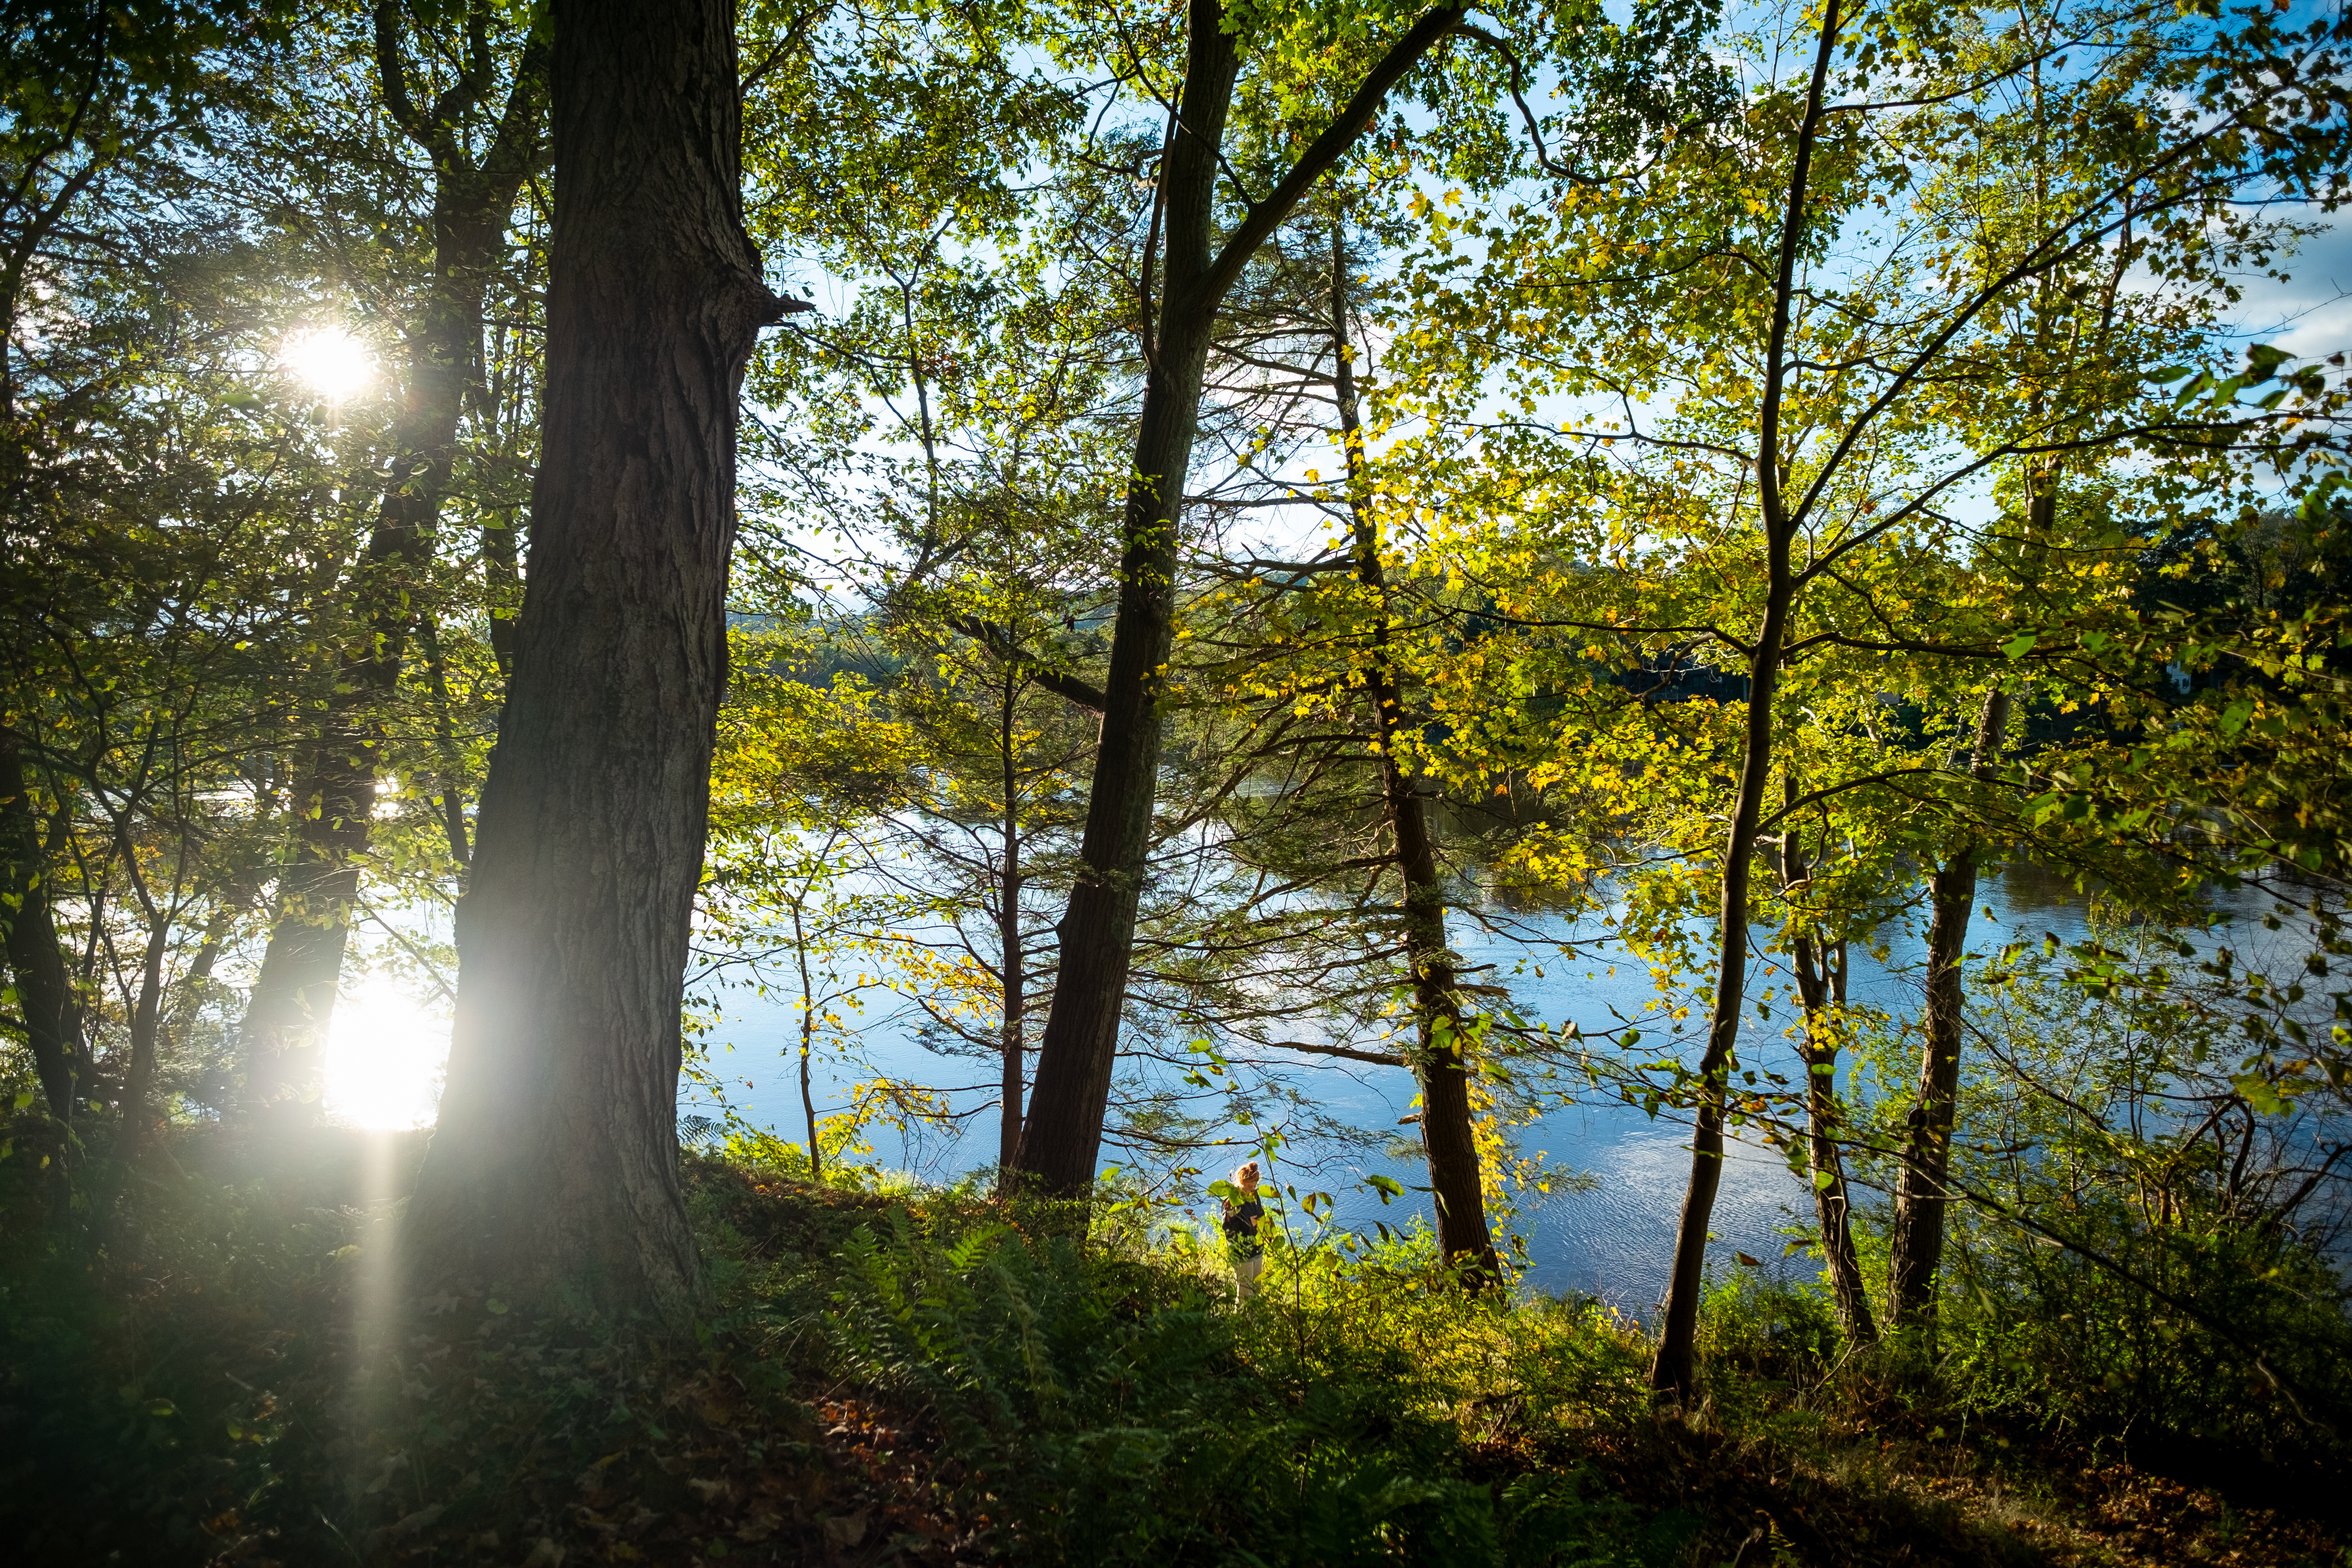 A view of a calm river through a stand of leafy trees; the sun is reflecting brightly off the water.